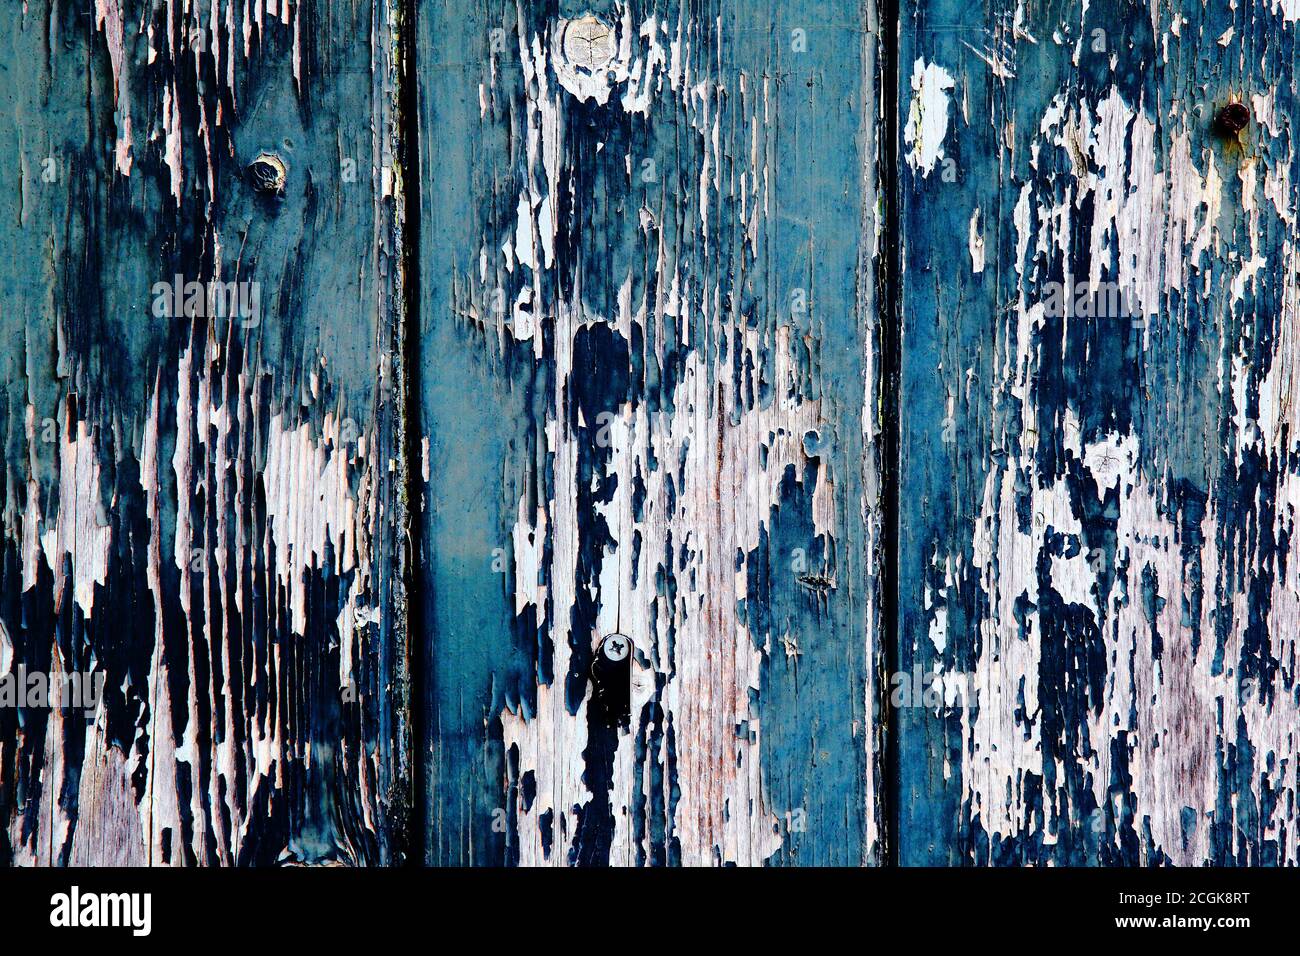 Aegean blue and sapphire blue old peeling worn paint on clapboard wood cladding. Texture textured background. Stock Photo